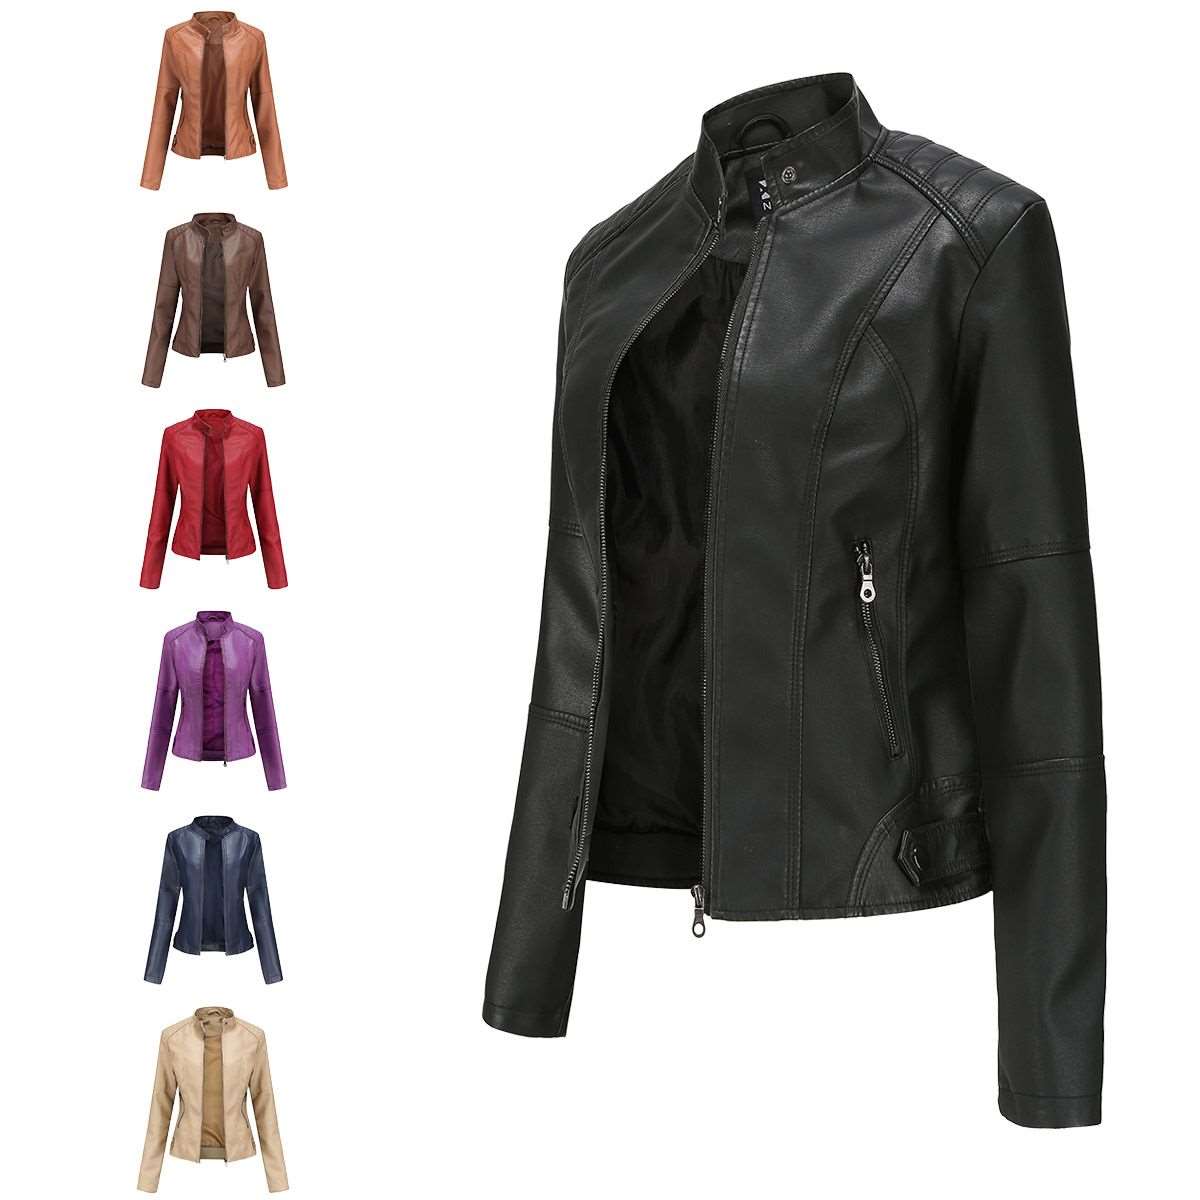 Non-Iron Slim-Fit Leather Jacket in Vibrant Colors, Sustainable Slim Leather Jacket in Various Colors